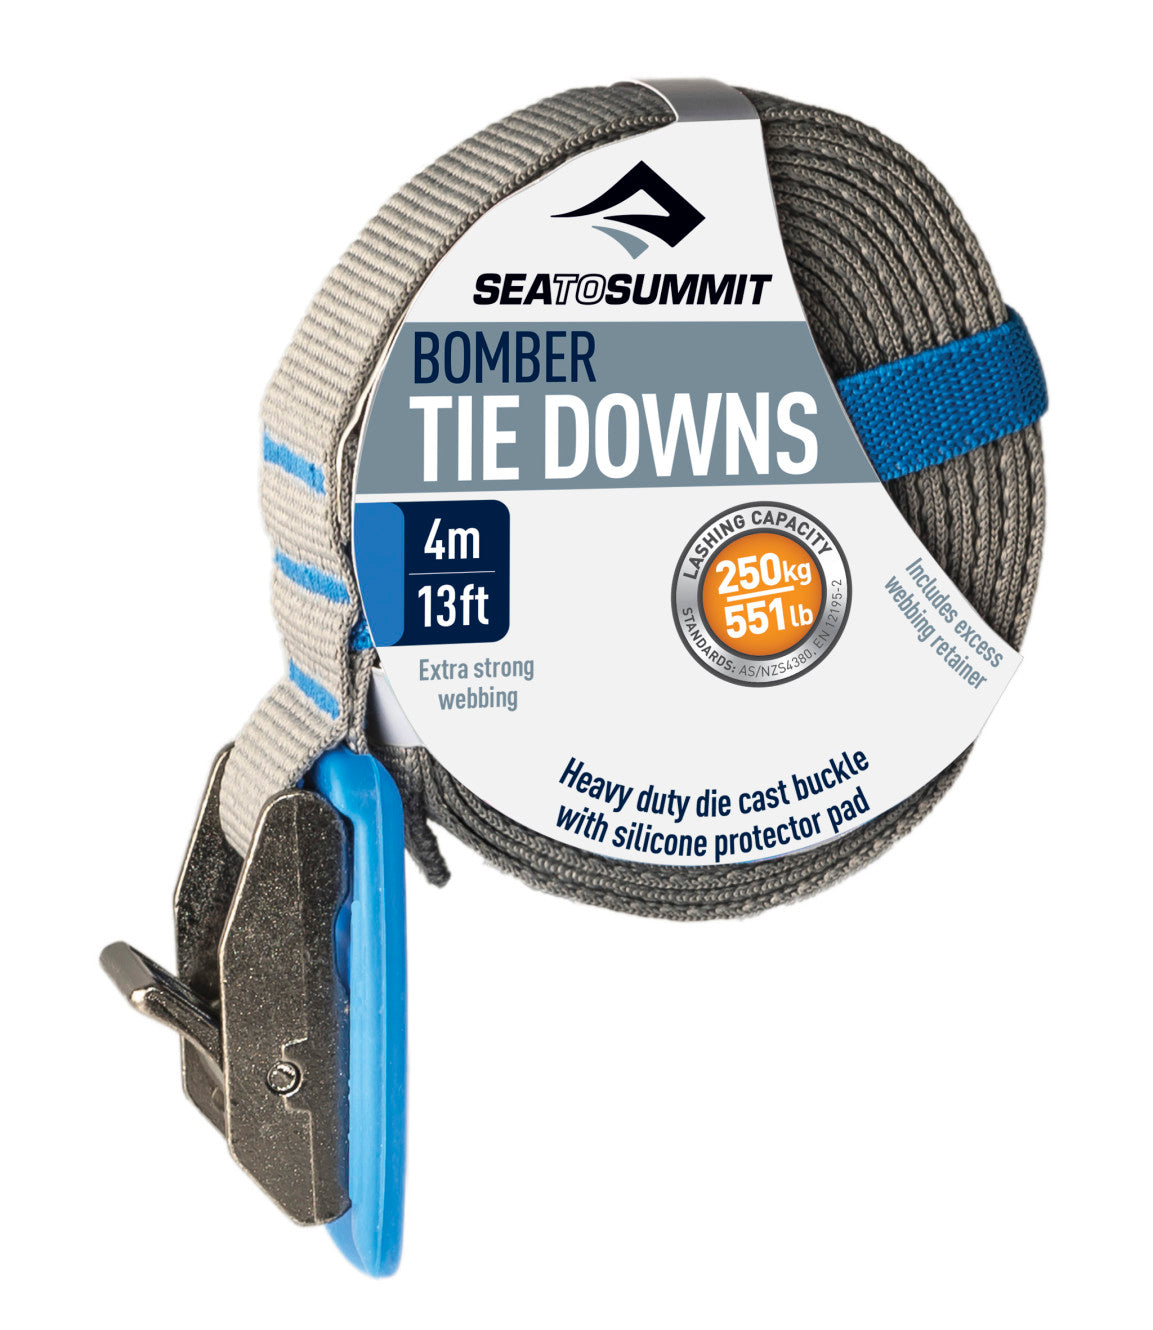 Sea to Summit Bomber Tie Down 4m/13ft